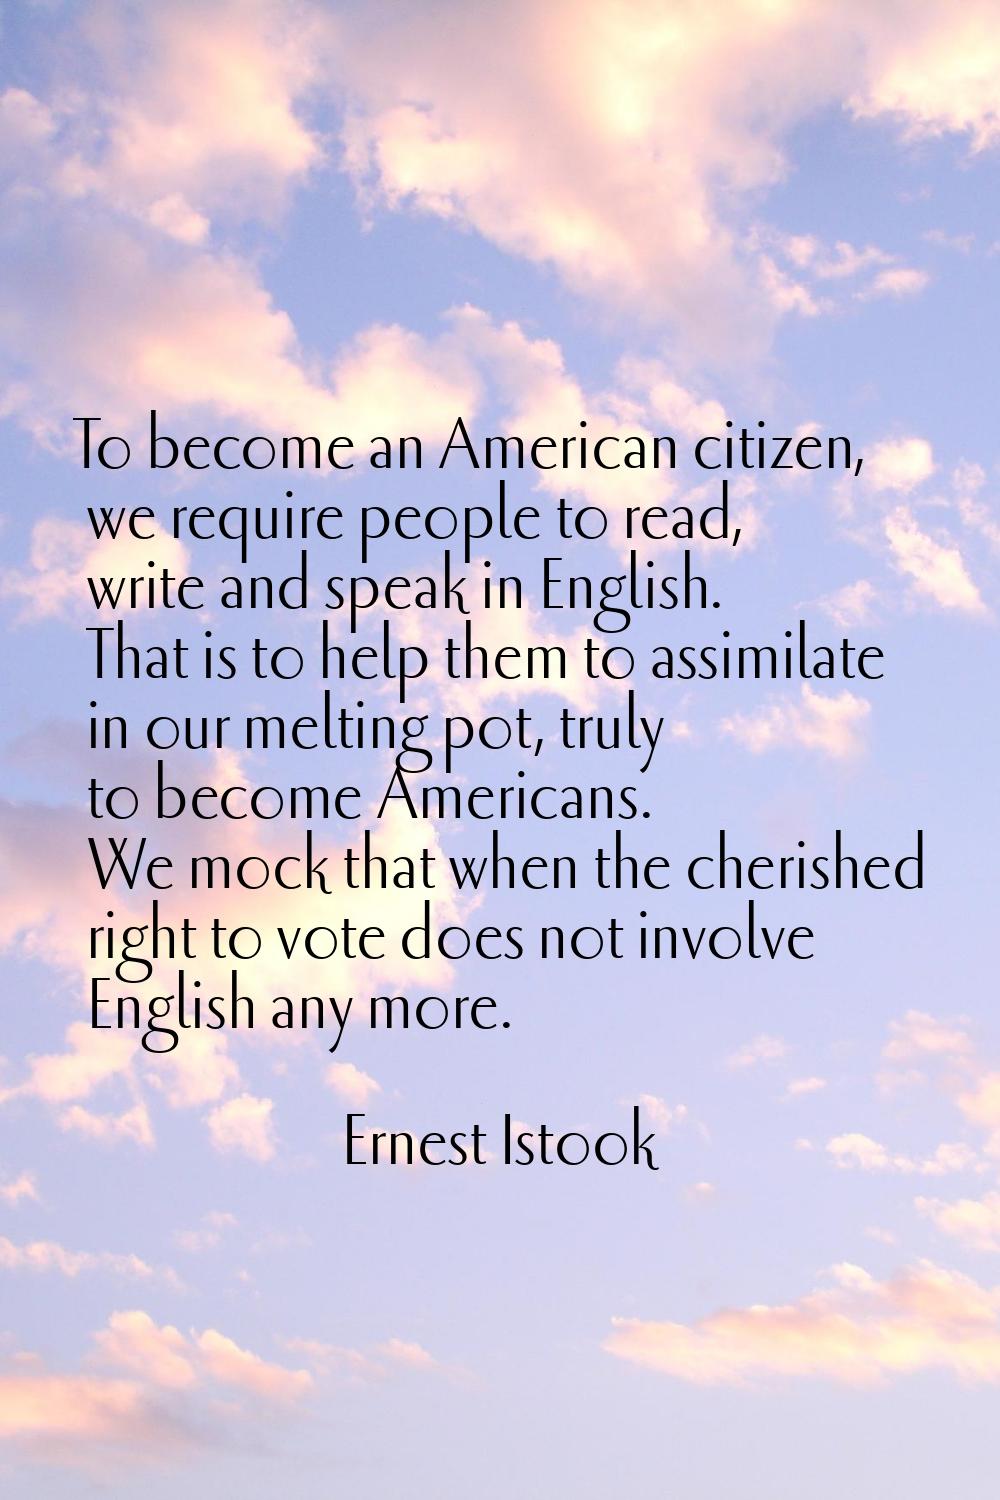 To become an American citizen, we require people to read, write and speak in English. That is to he